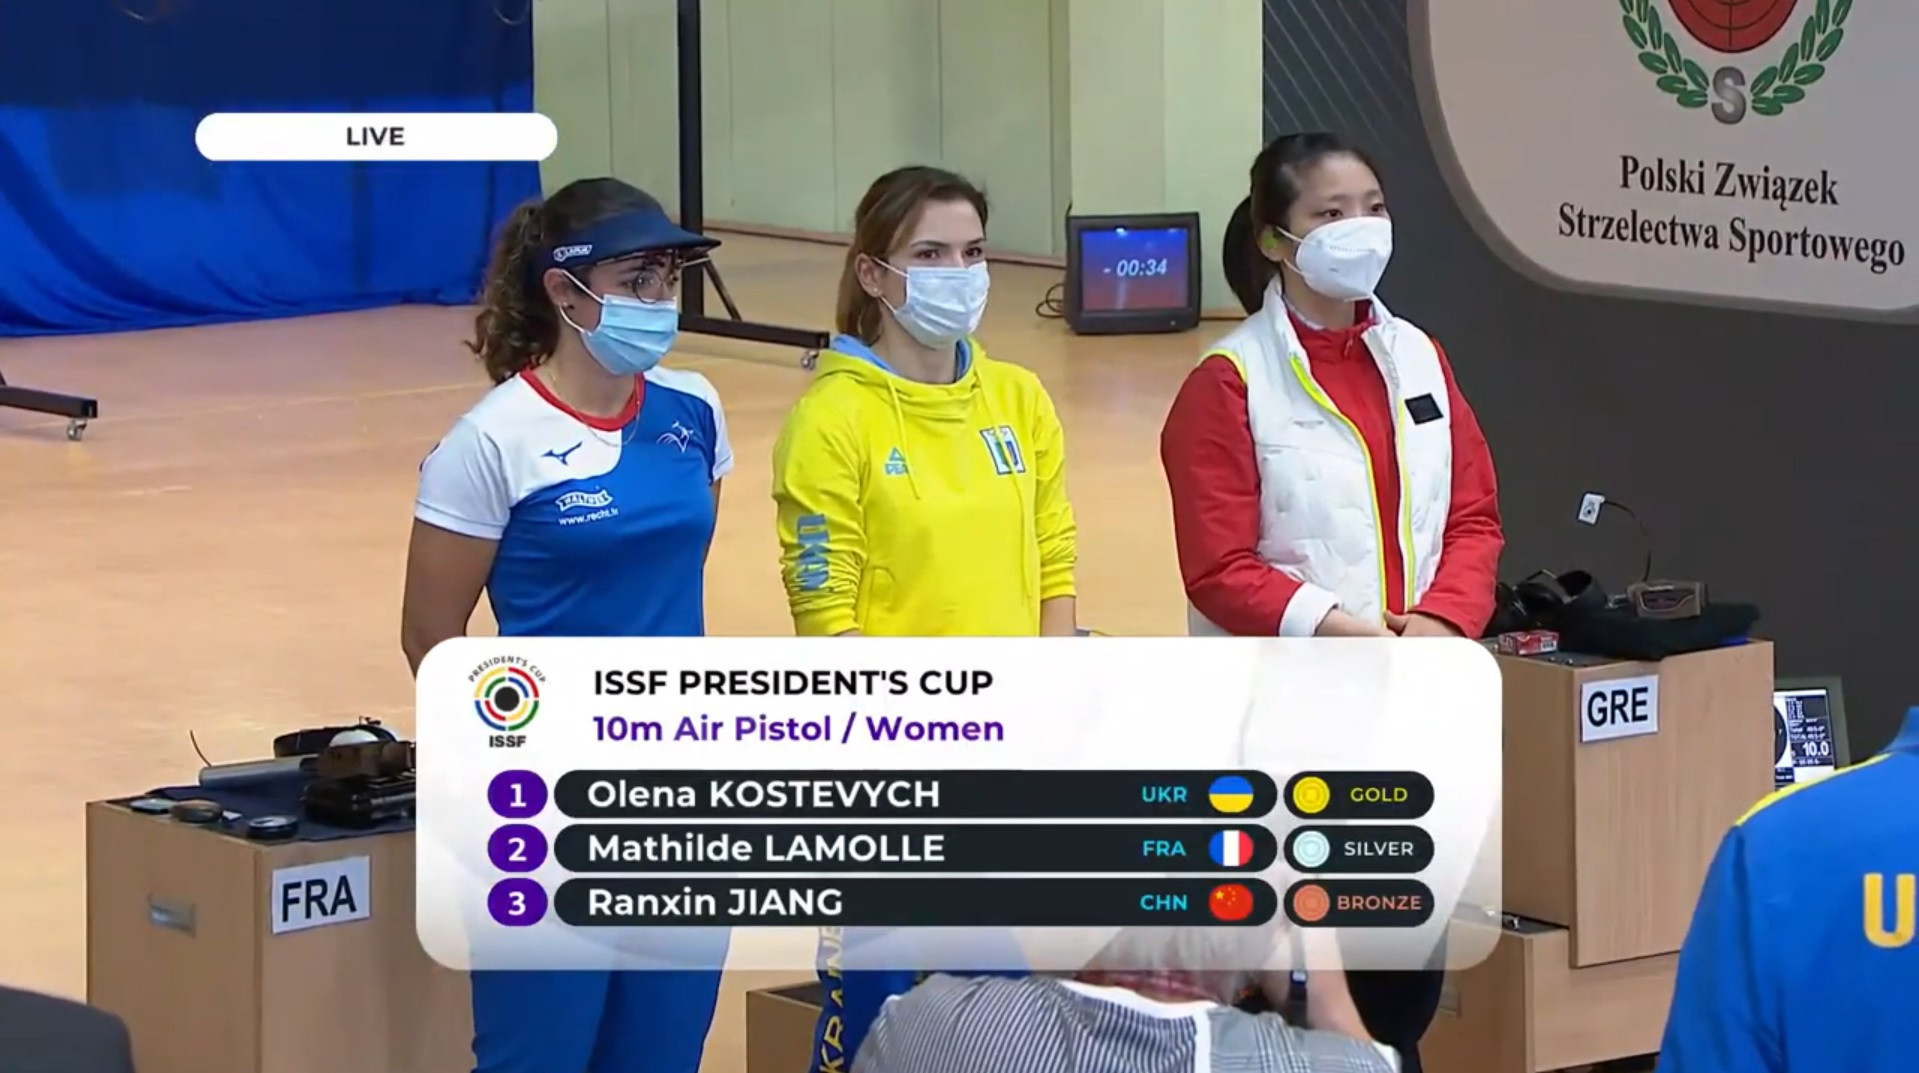 Olena Kostevych emerged victorious from a tightly-contested women’s 10m air pistol final ©ISSF/YouTube